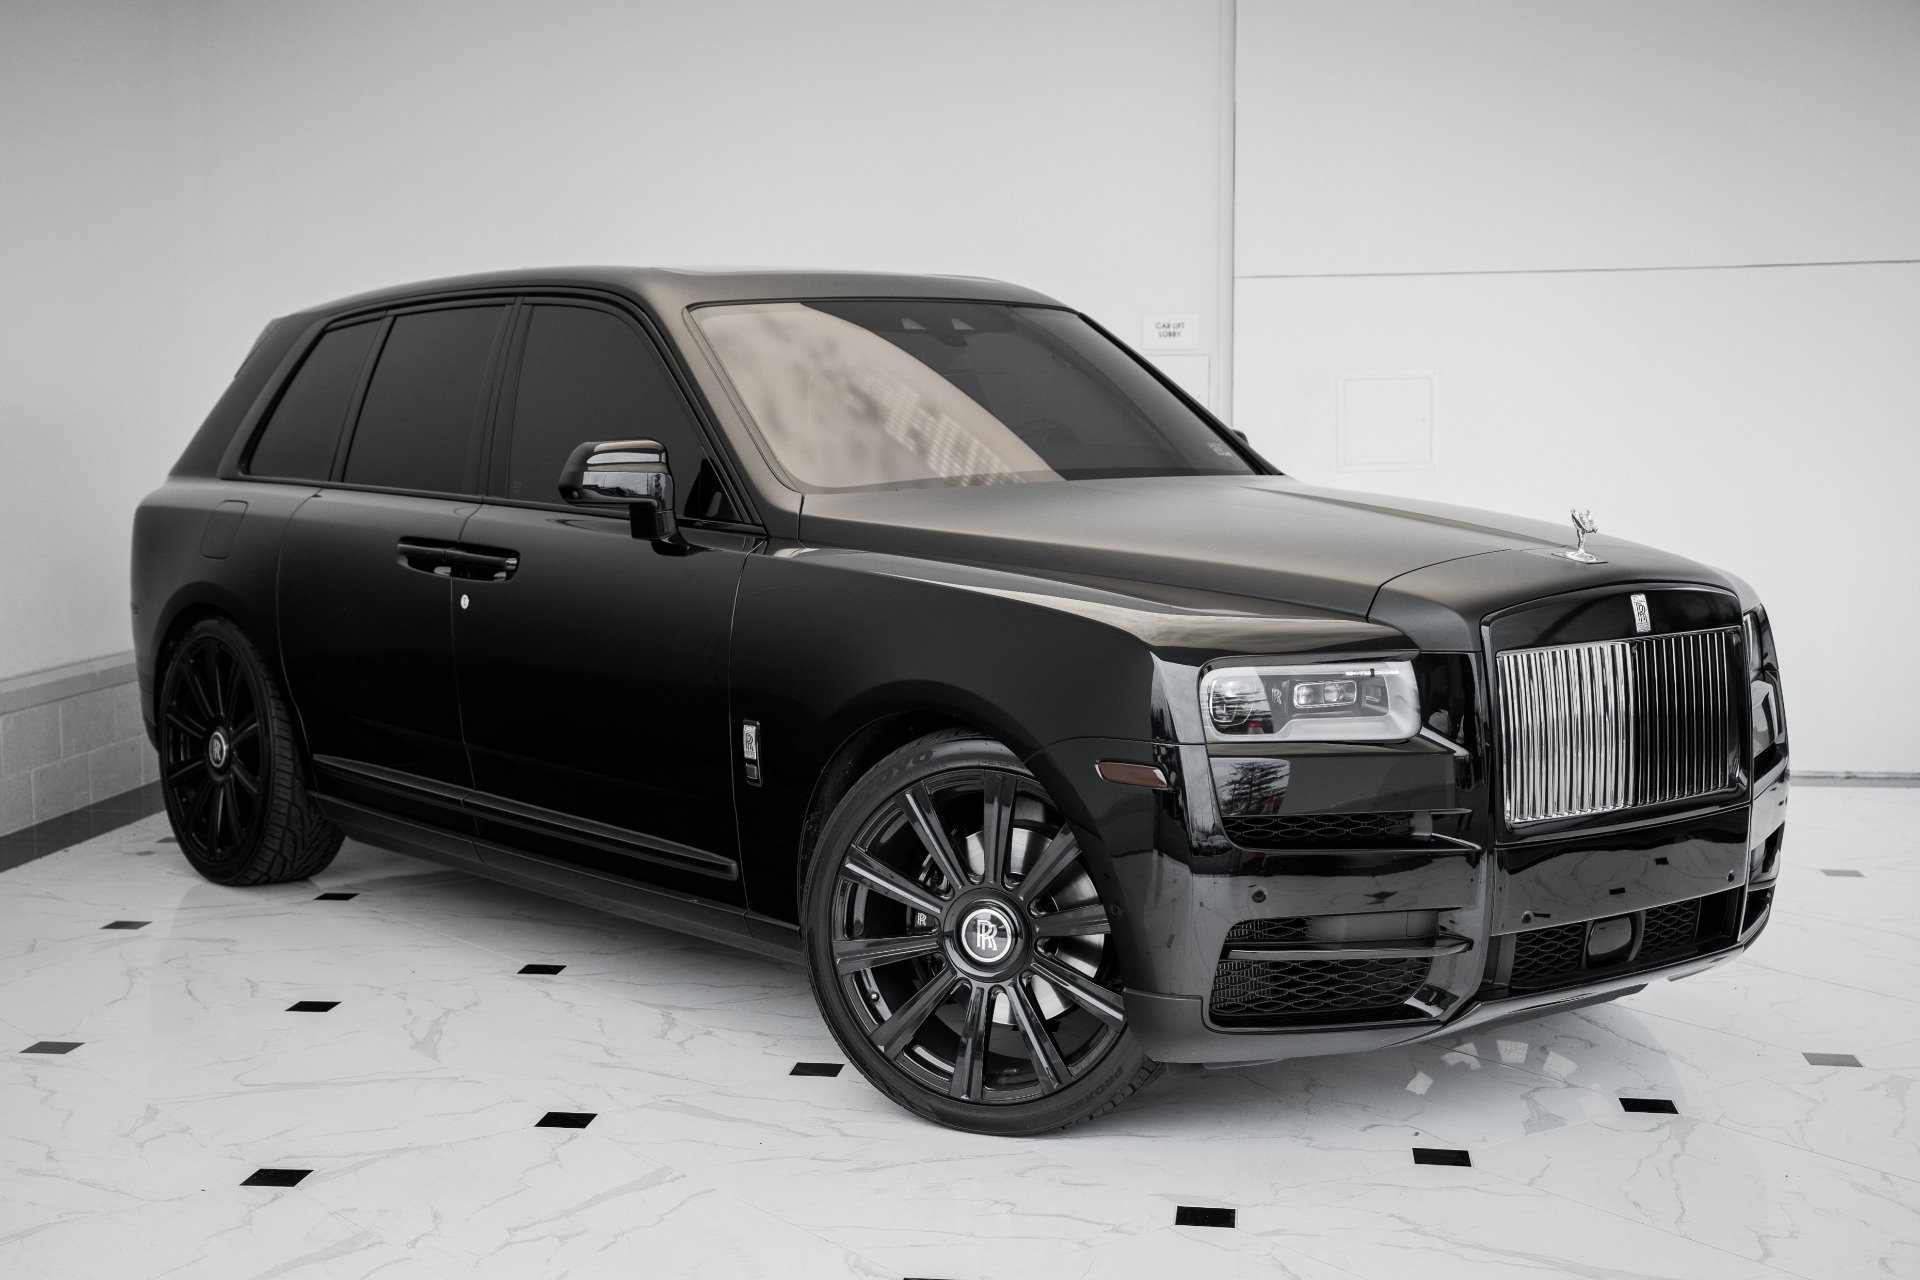 Used 2019 RollsRoyce Cullinan For Sale Sold  Exclusive Automotive Group  Stock C114337